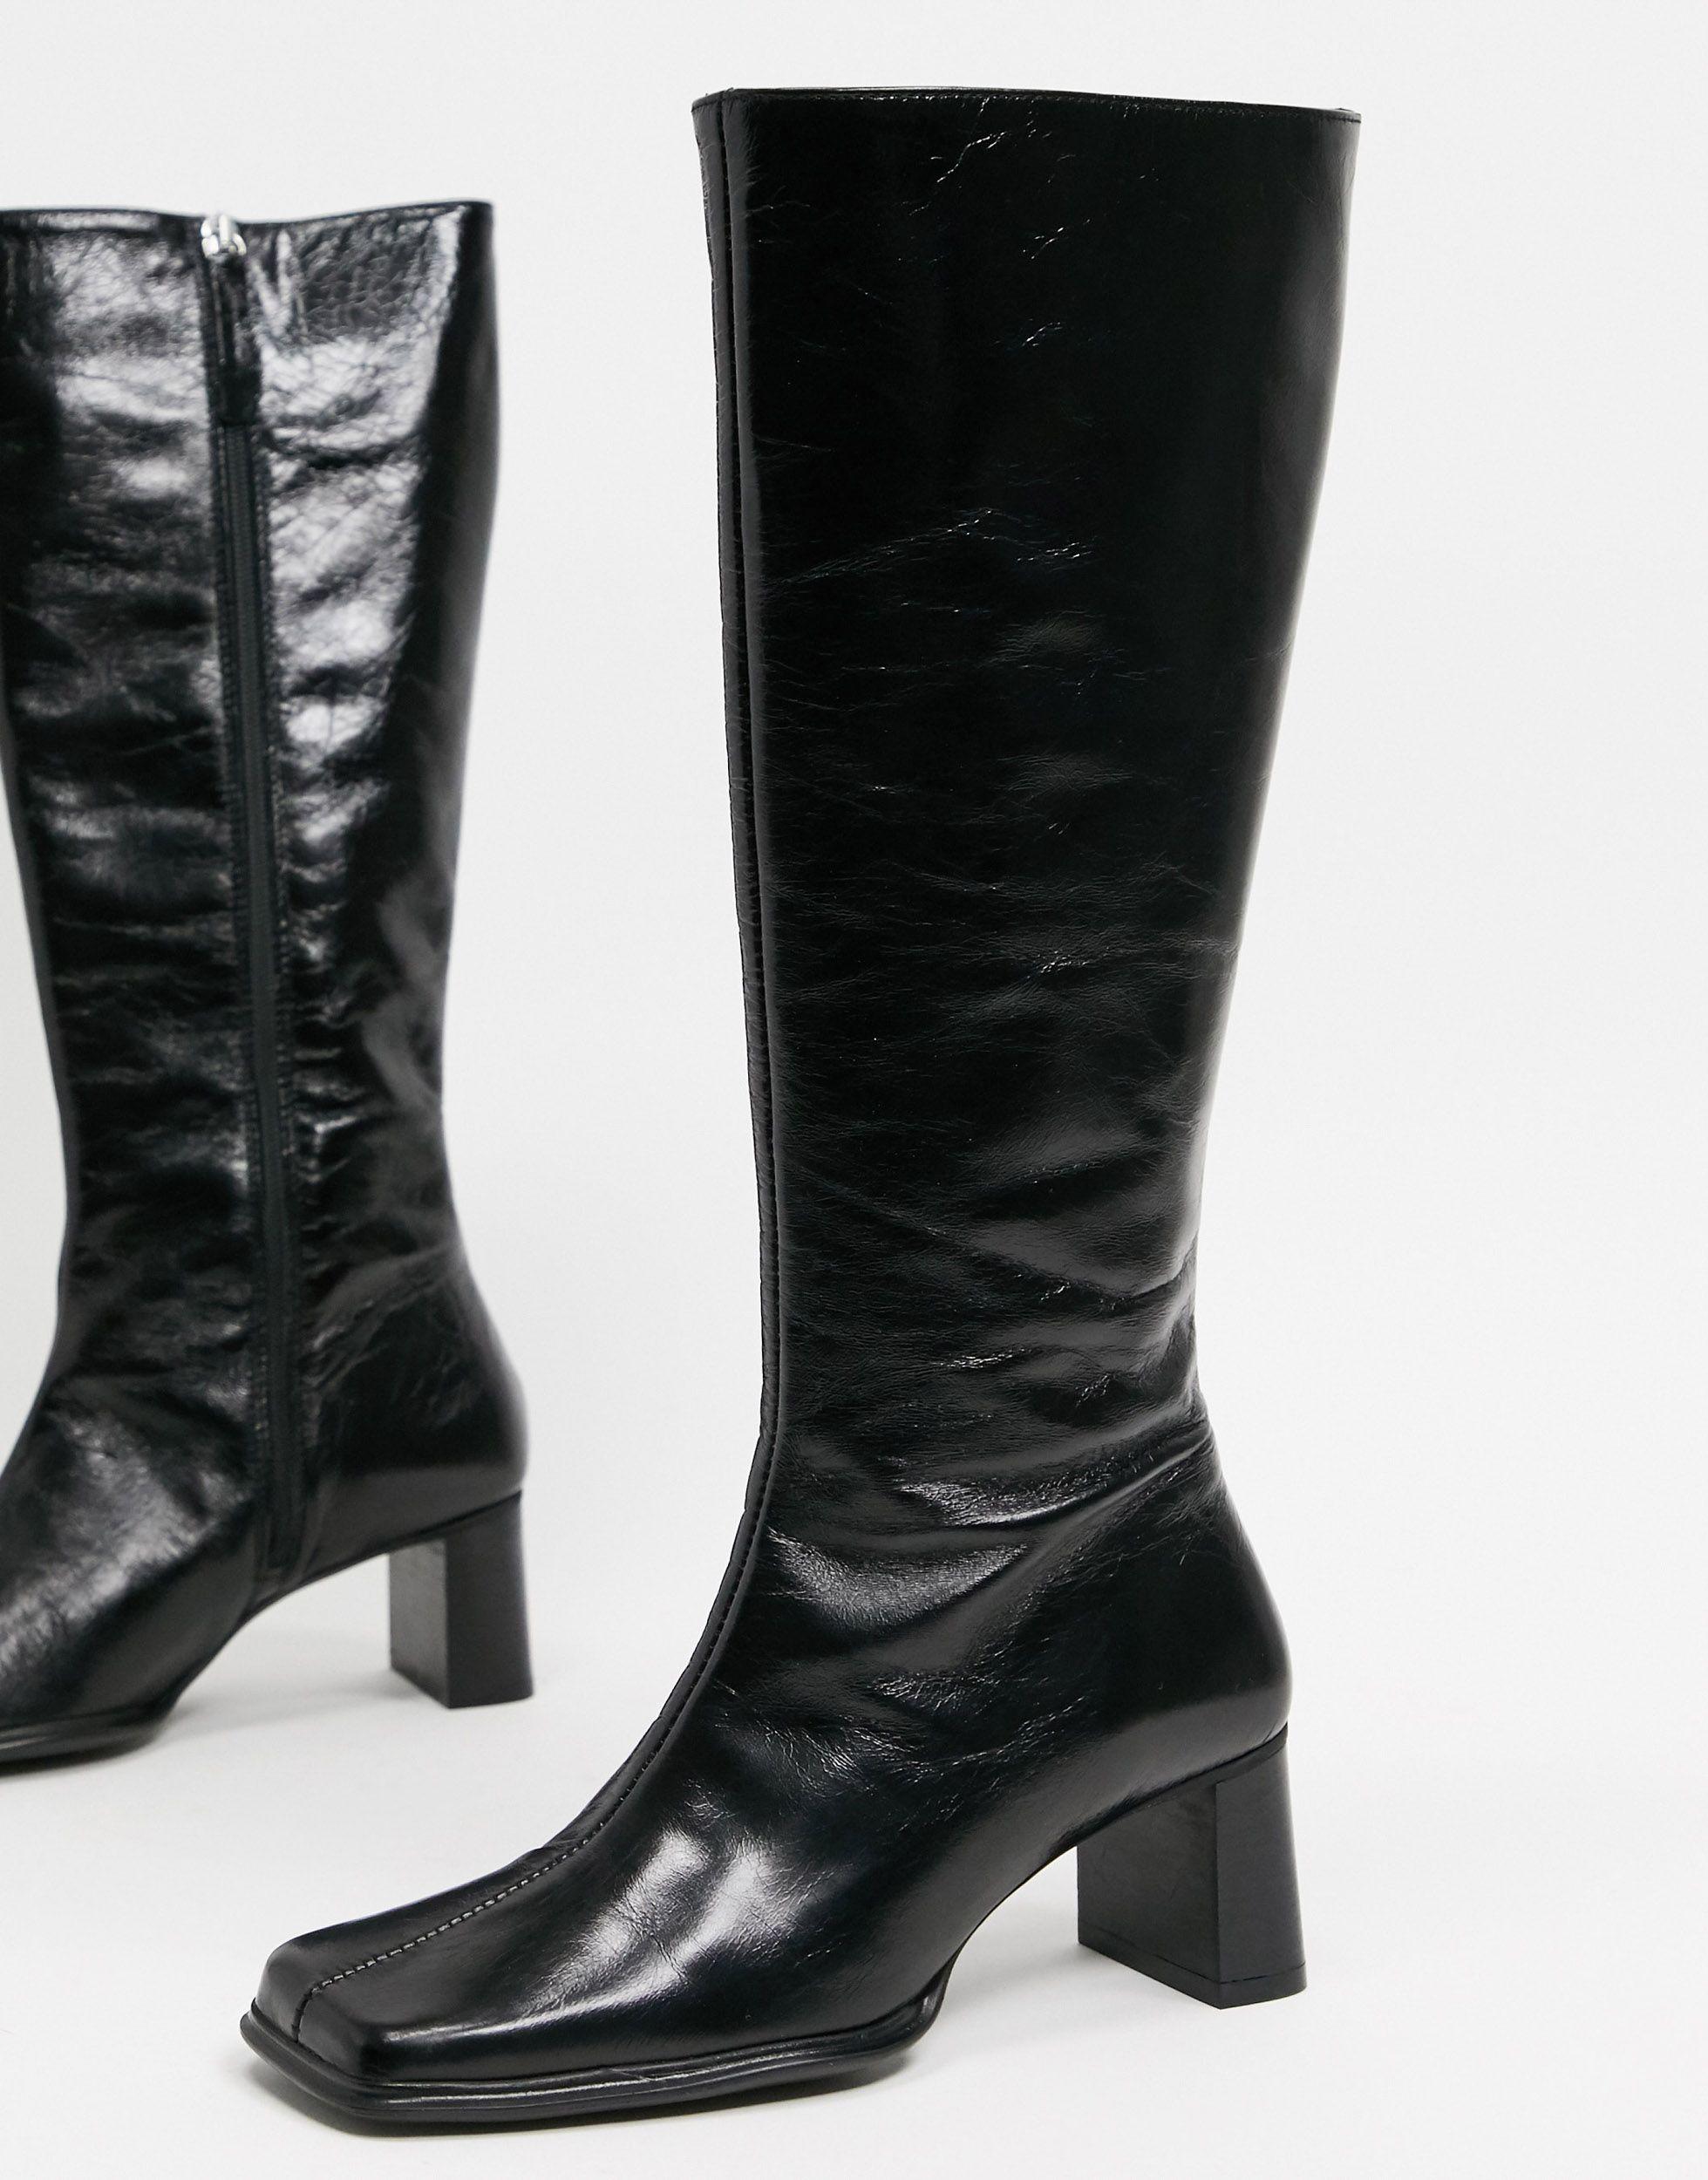 ASOS Cali Premium Leather Heeled Knee Boots in Black - Lyst